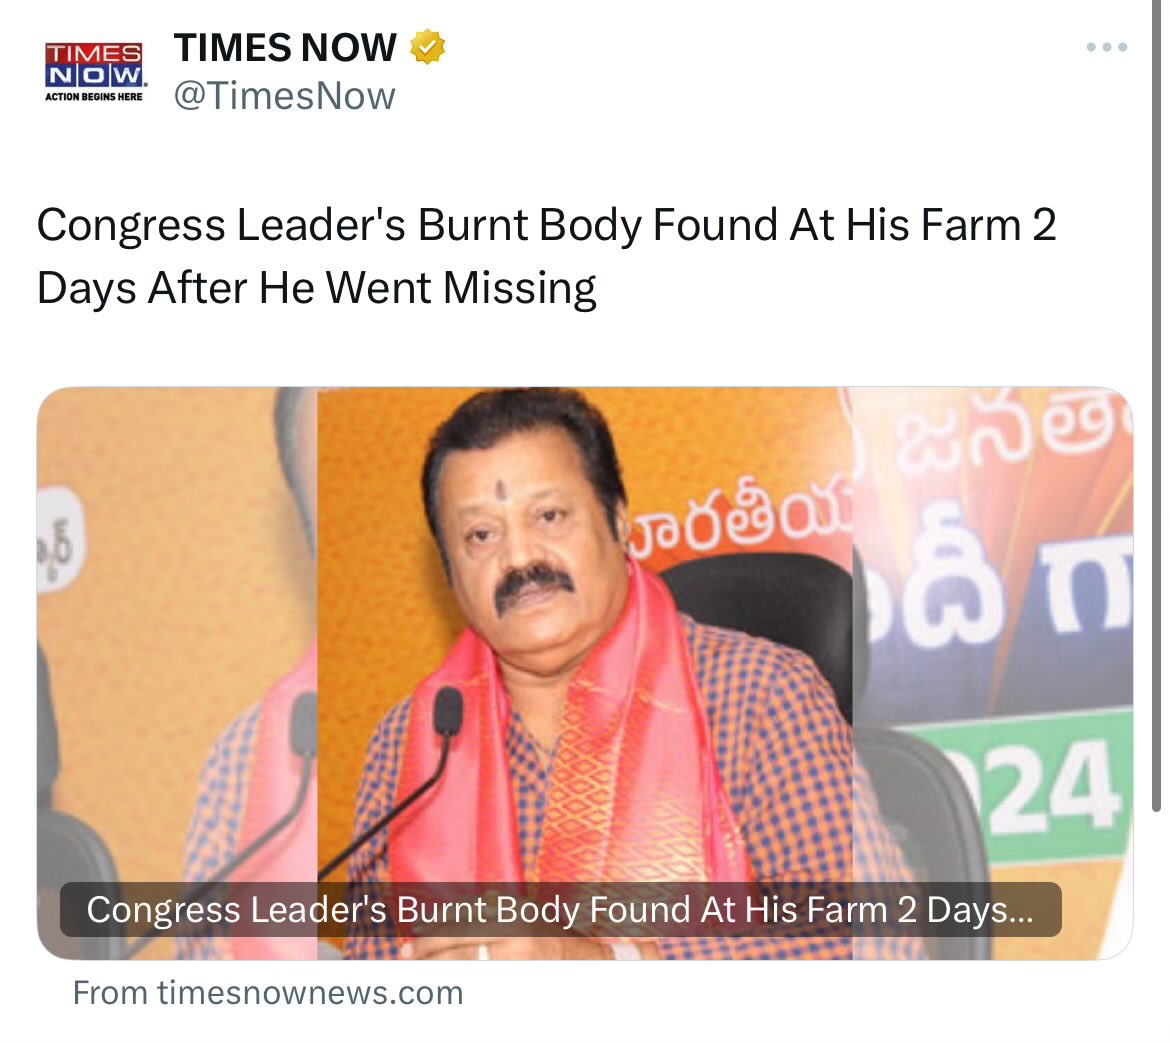 @TimesNow What are you guys smoking ?

This is suresh gopi